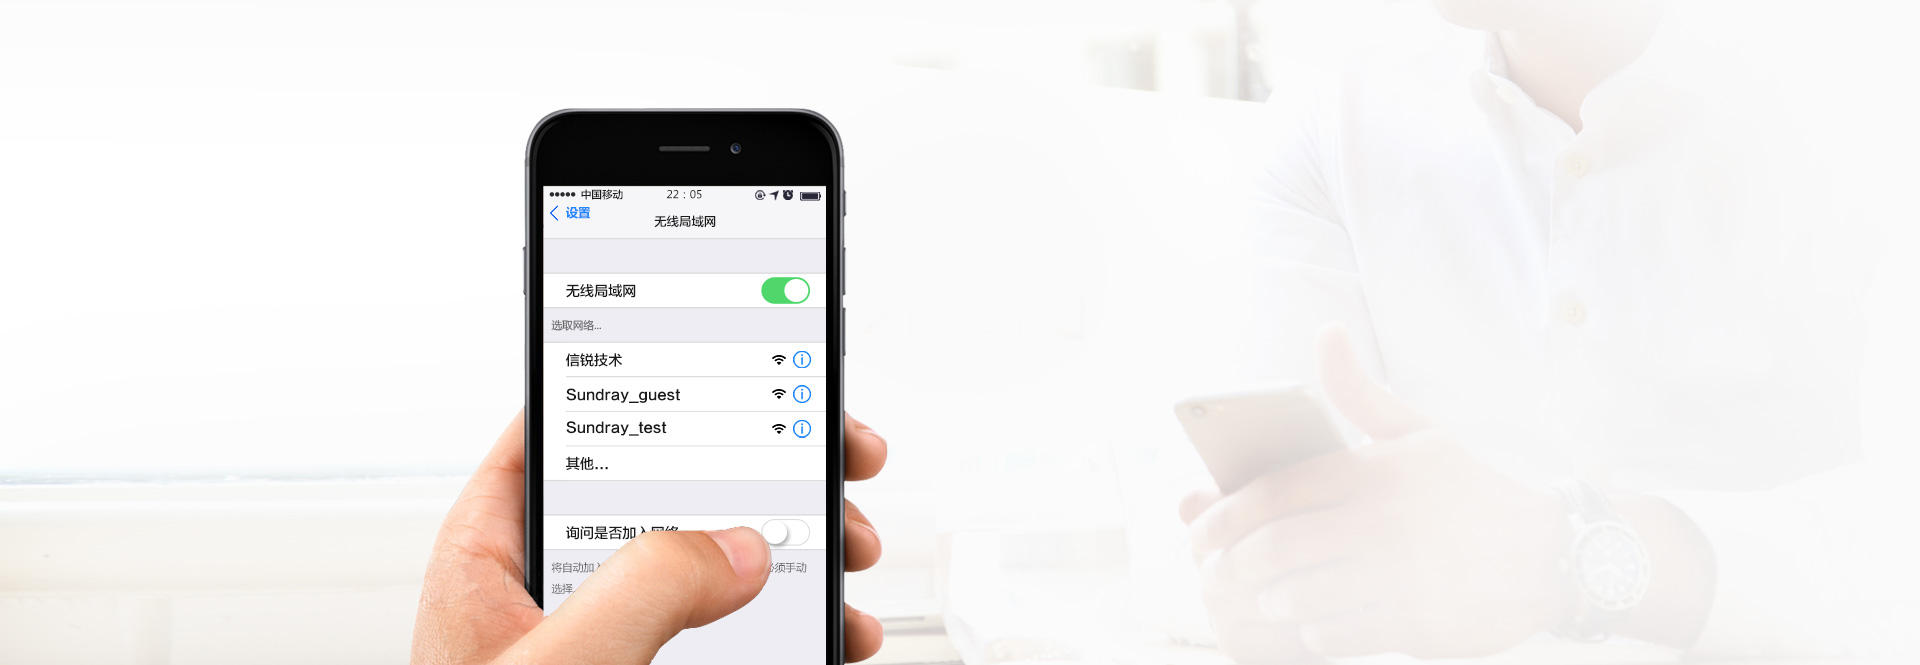 Support 32 SSID in one device, including Chinese SSID